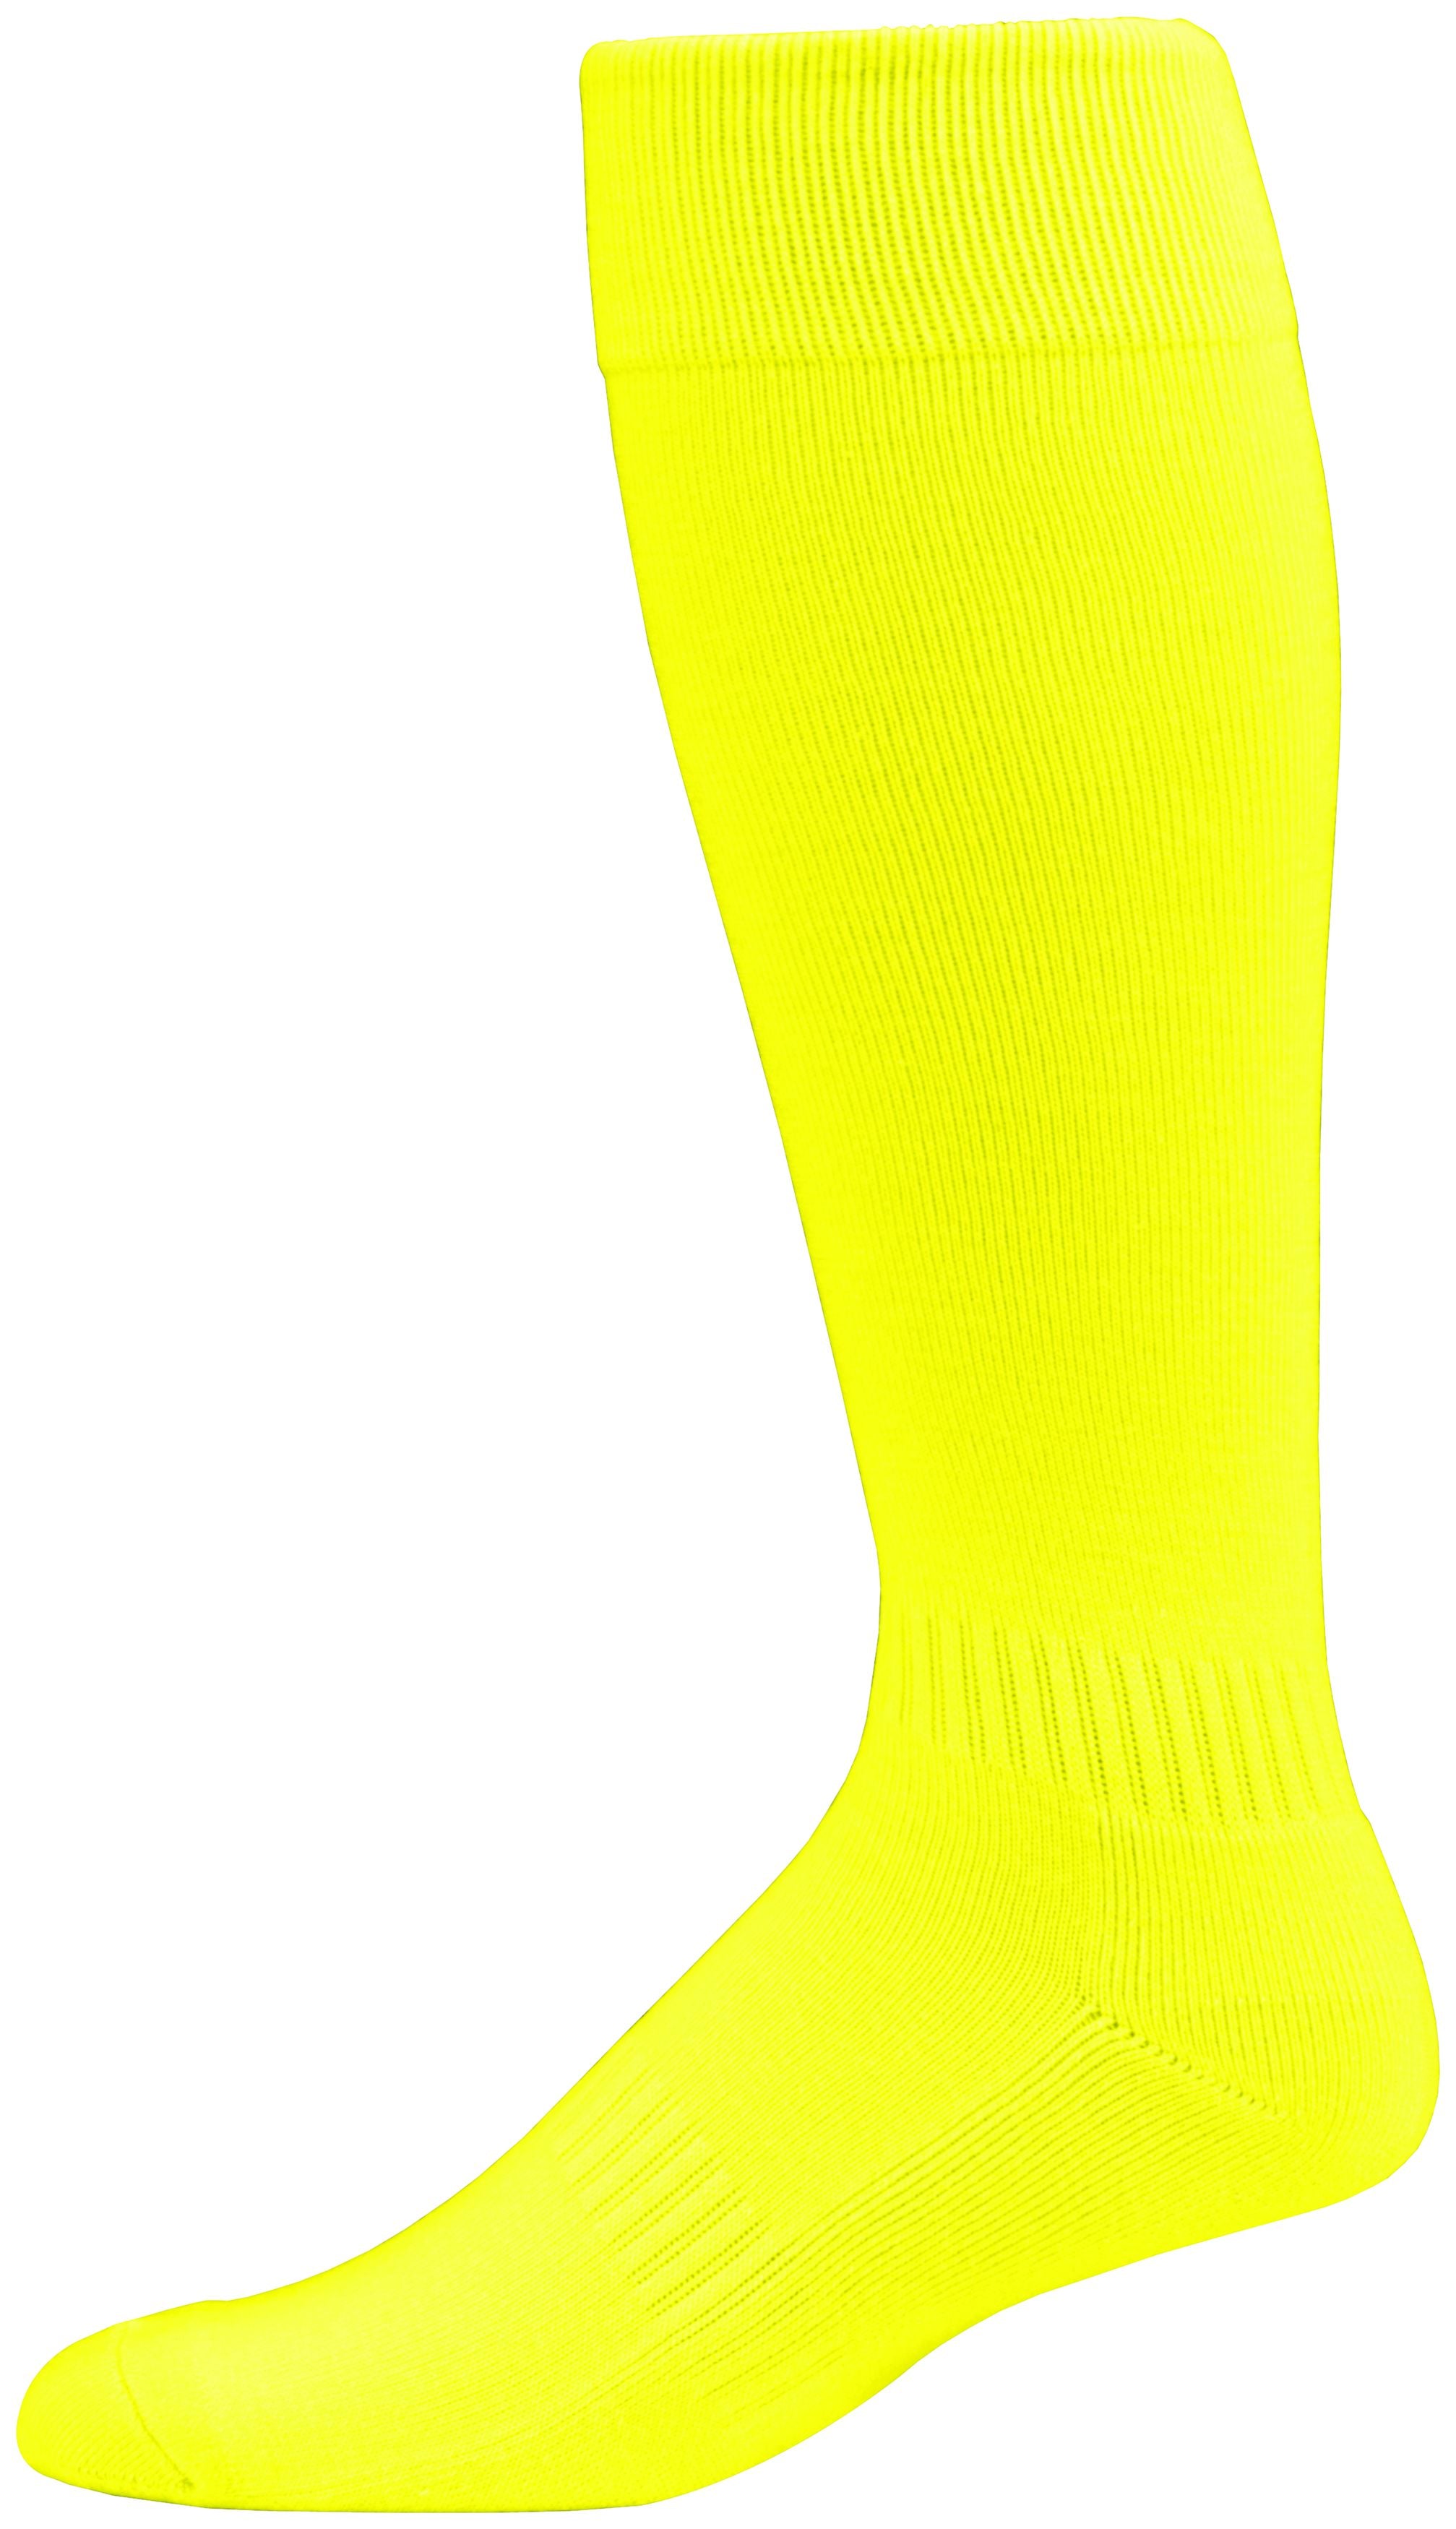 Augusta Sportswear Elite Multi-Sport Sock in Power Yellow  -Part of the Accessories, Augusta-Products, Accessories-Socks product lines at KanaleyCreations.com